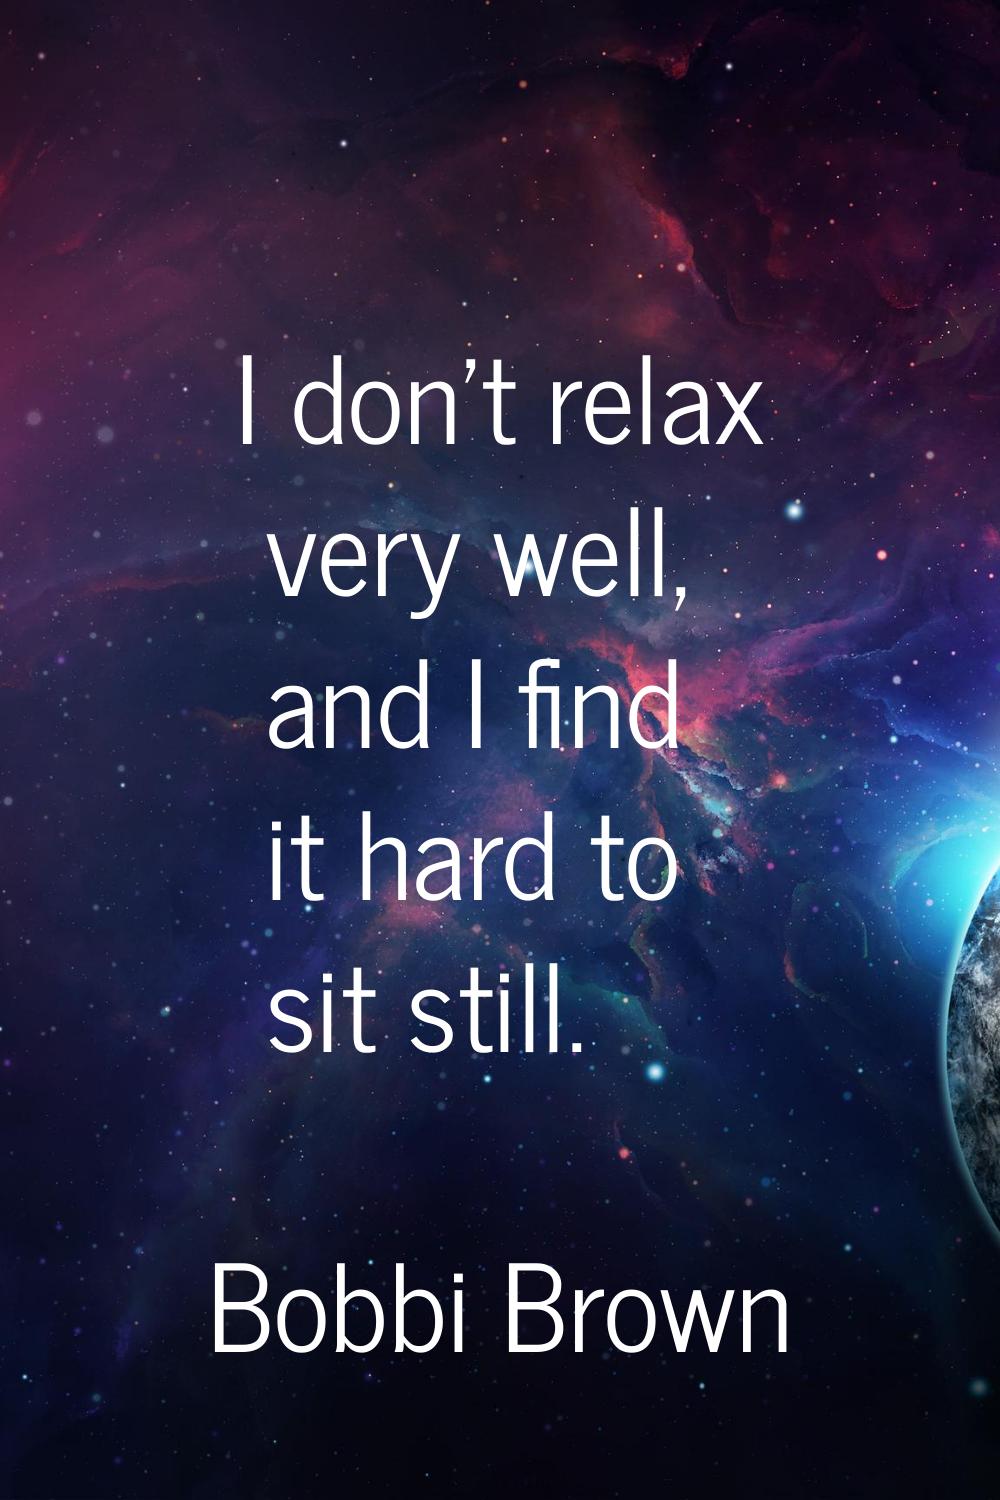 I don't relax very well, and I find it hard to sit still.